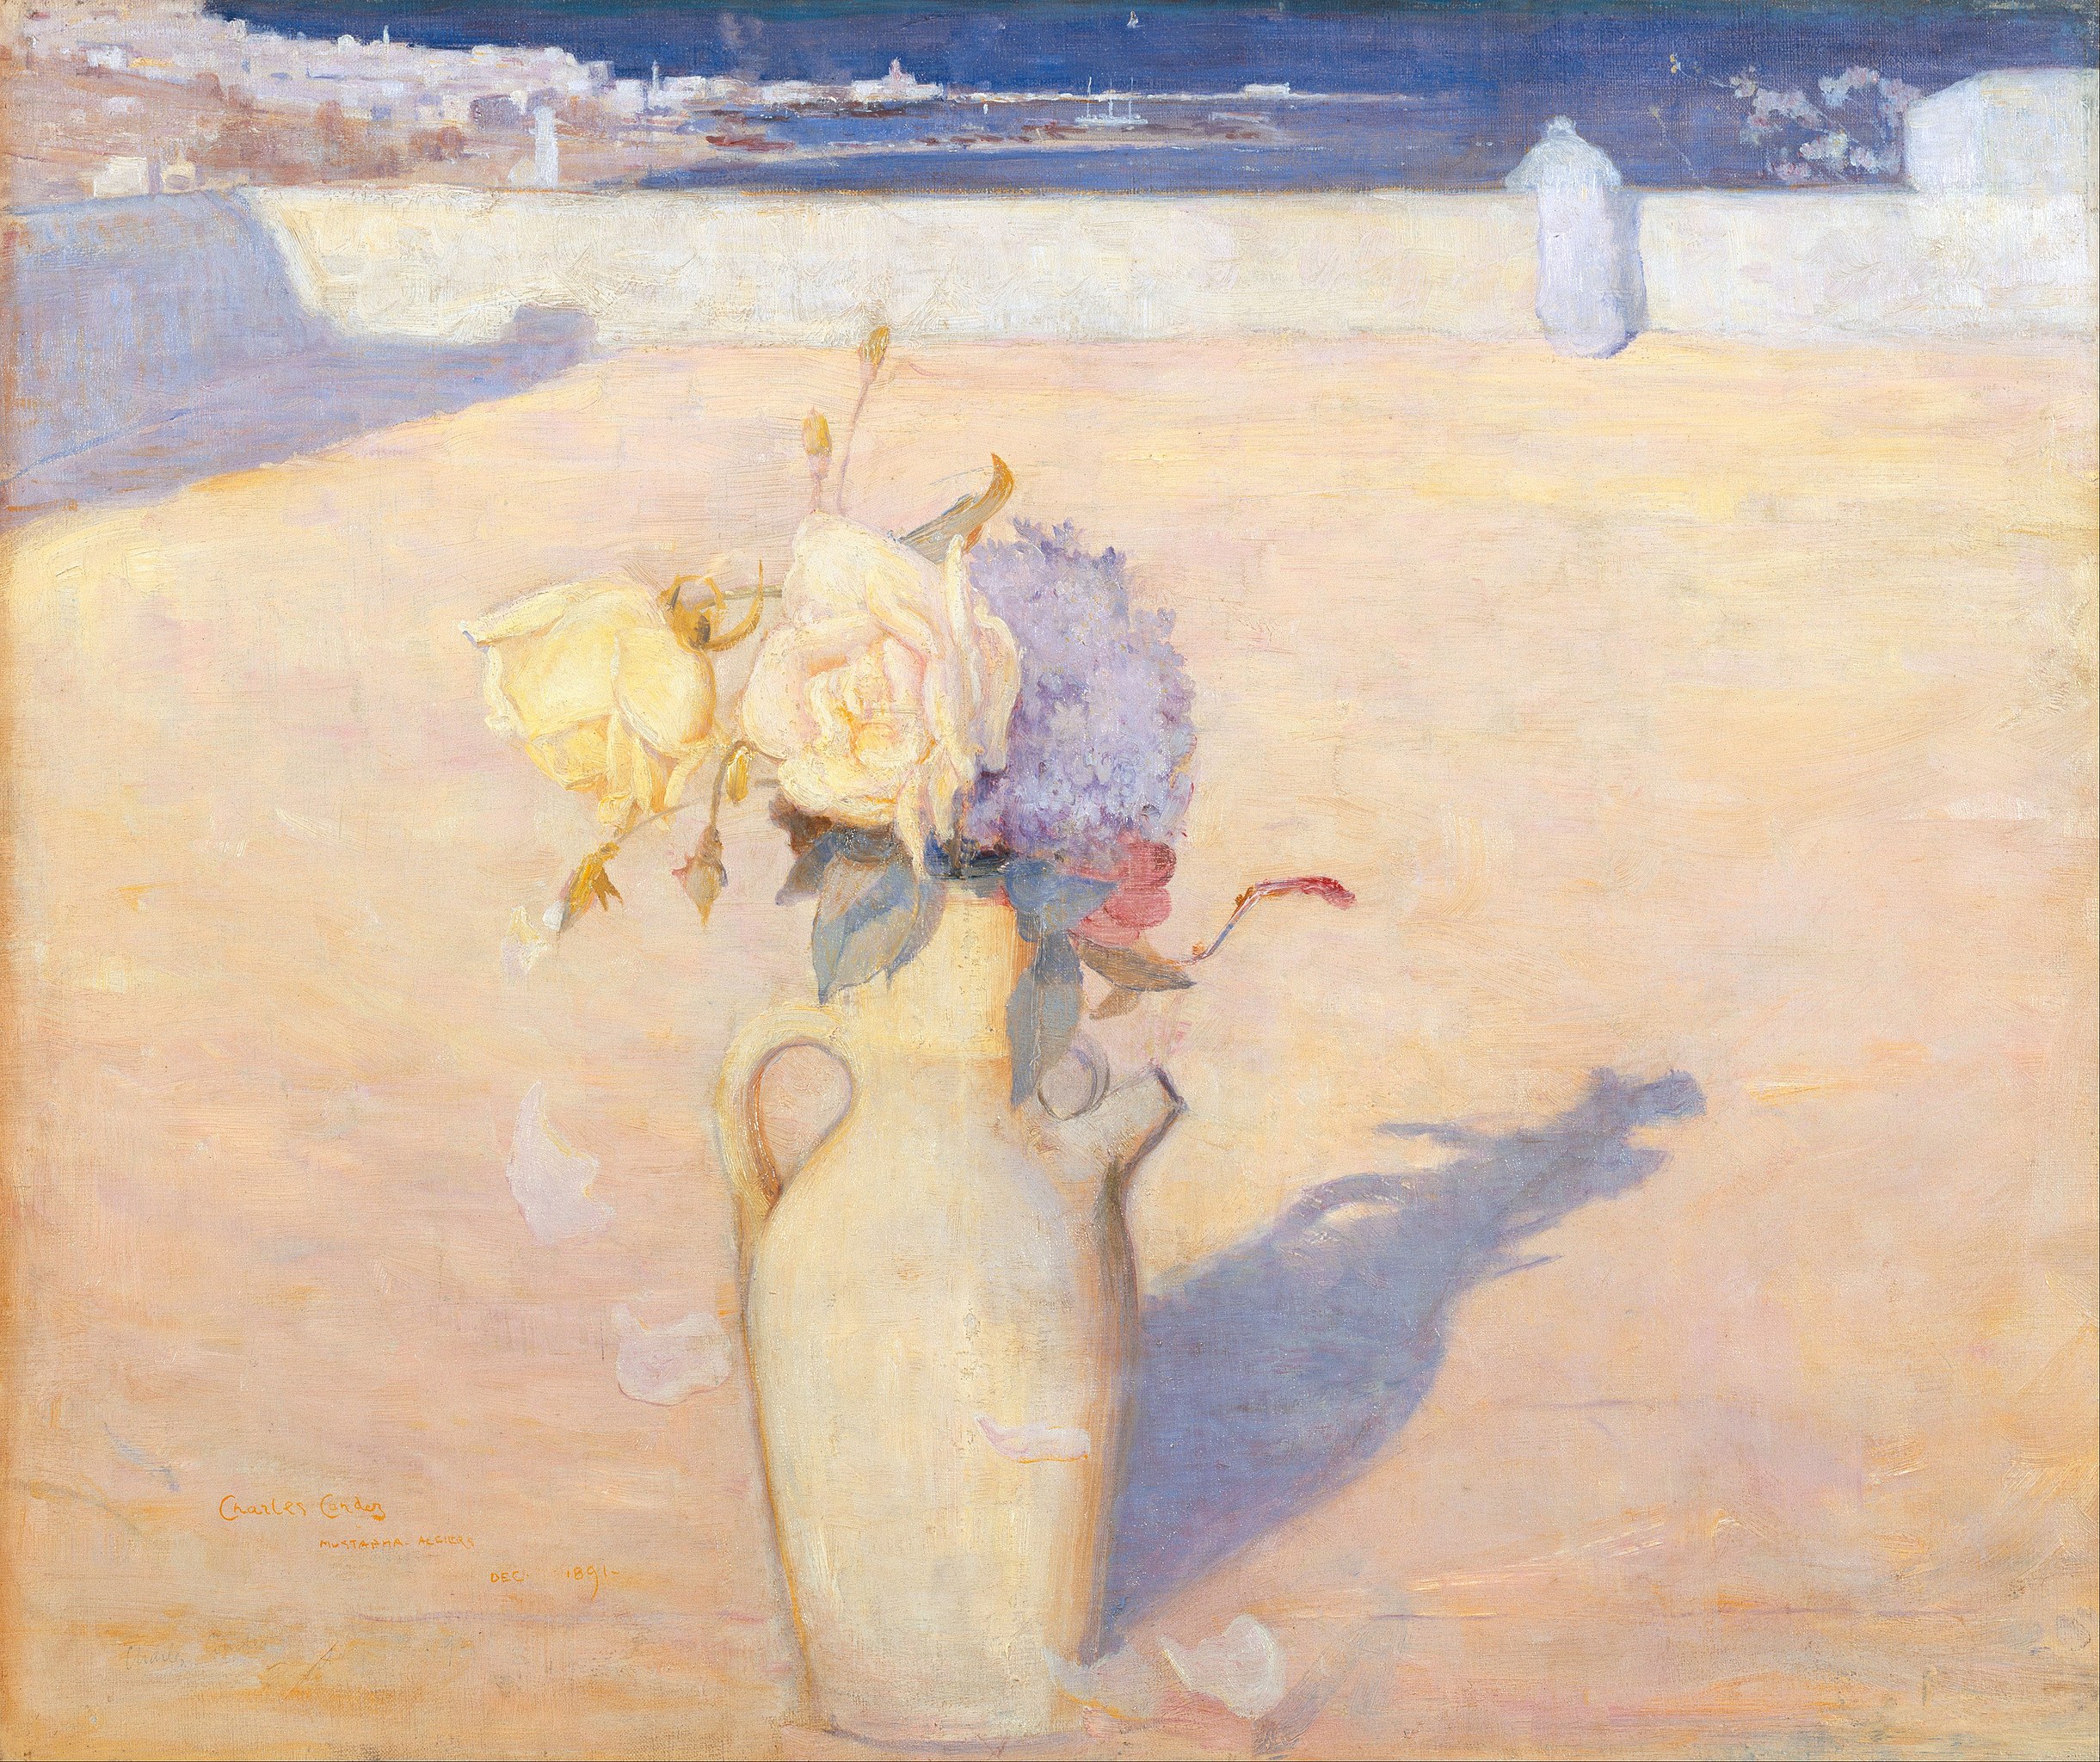 Der heiße Sand, Mustapha, Algier by Charles Conder - 1891 - 63 x 72 cm Art Gallery of New South Wales